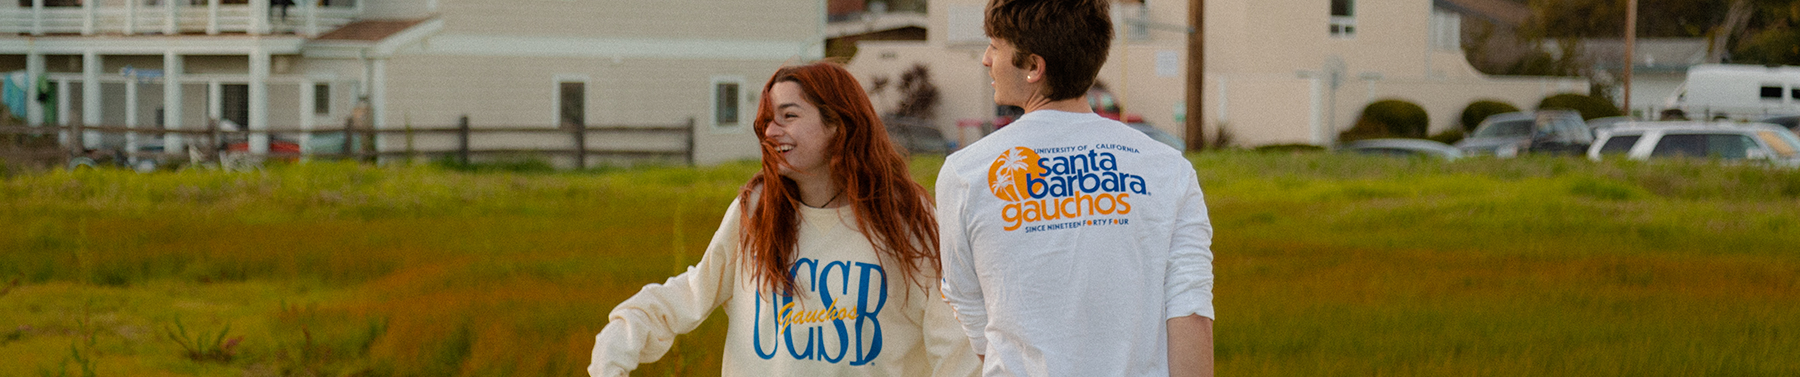 UCSB Long Sleeves